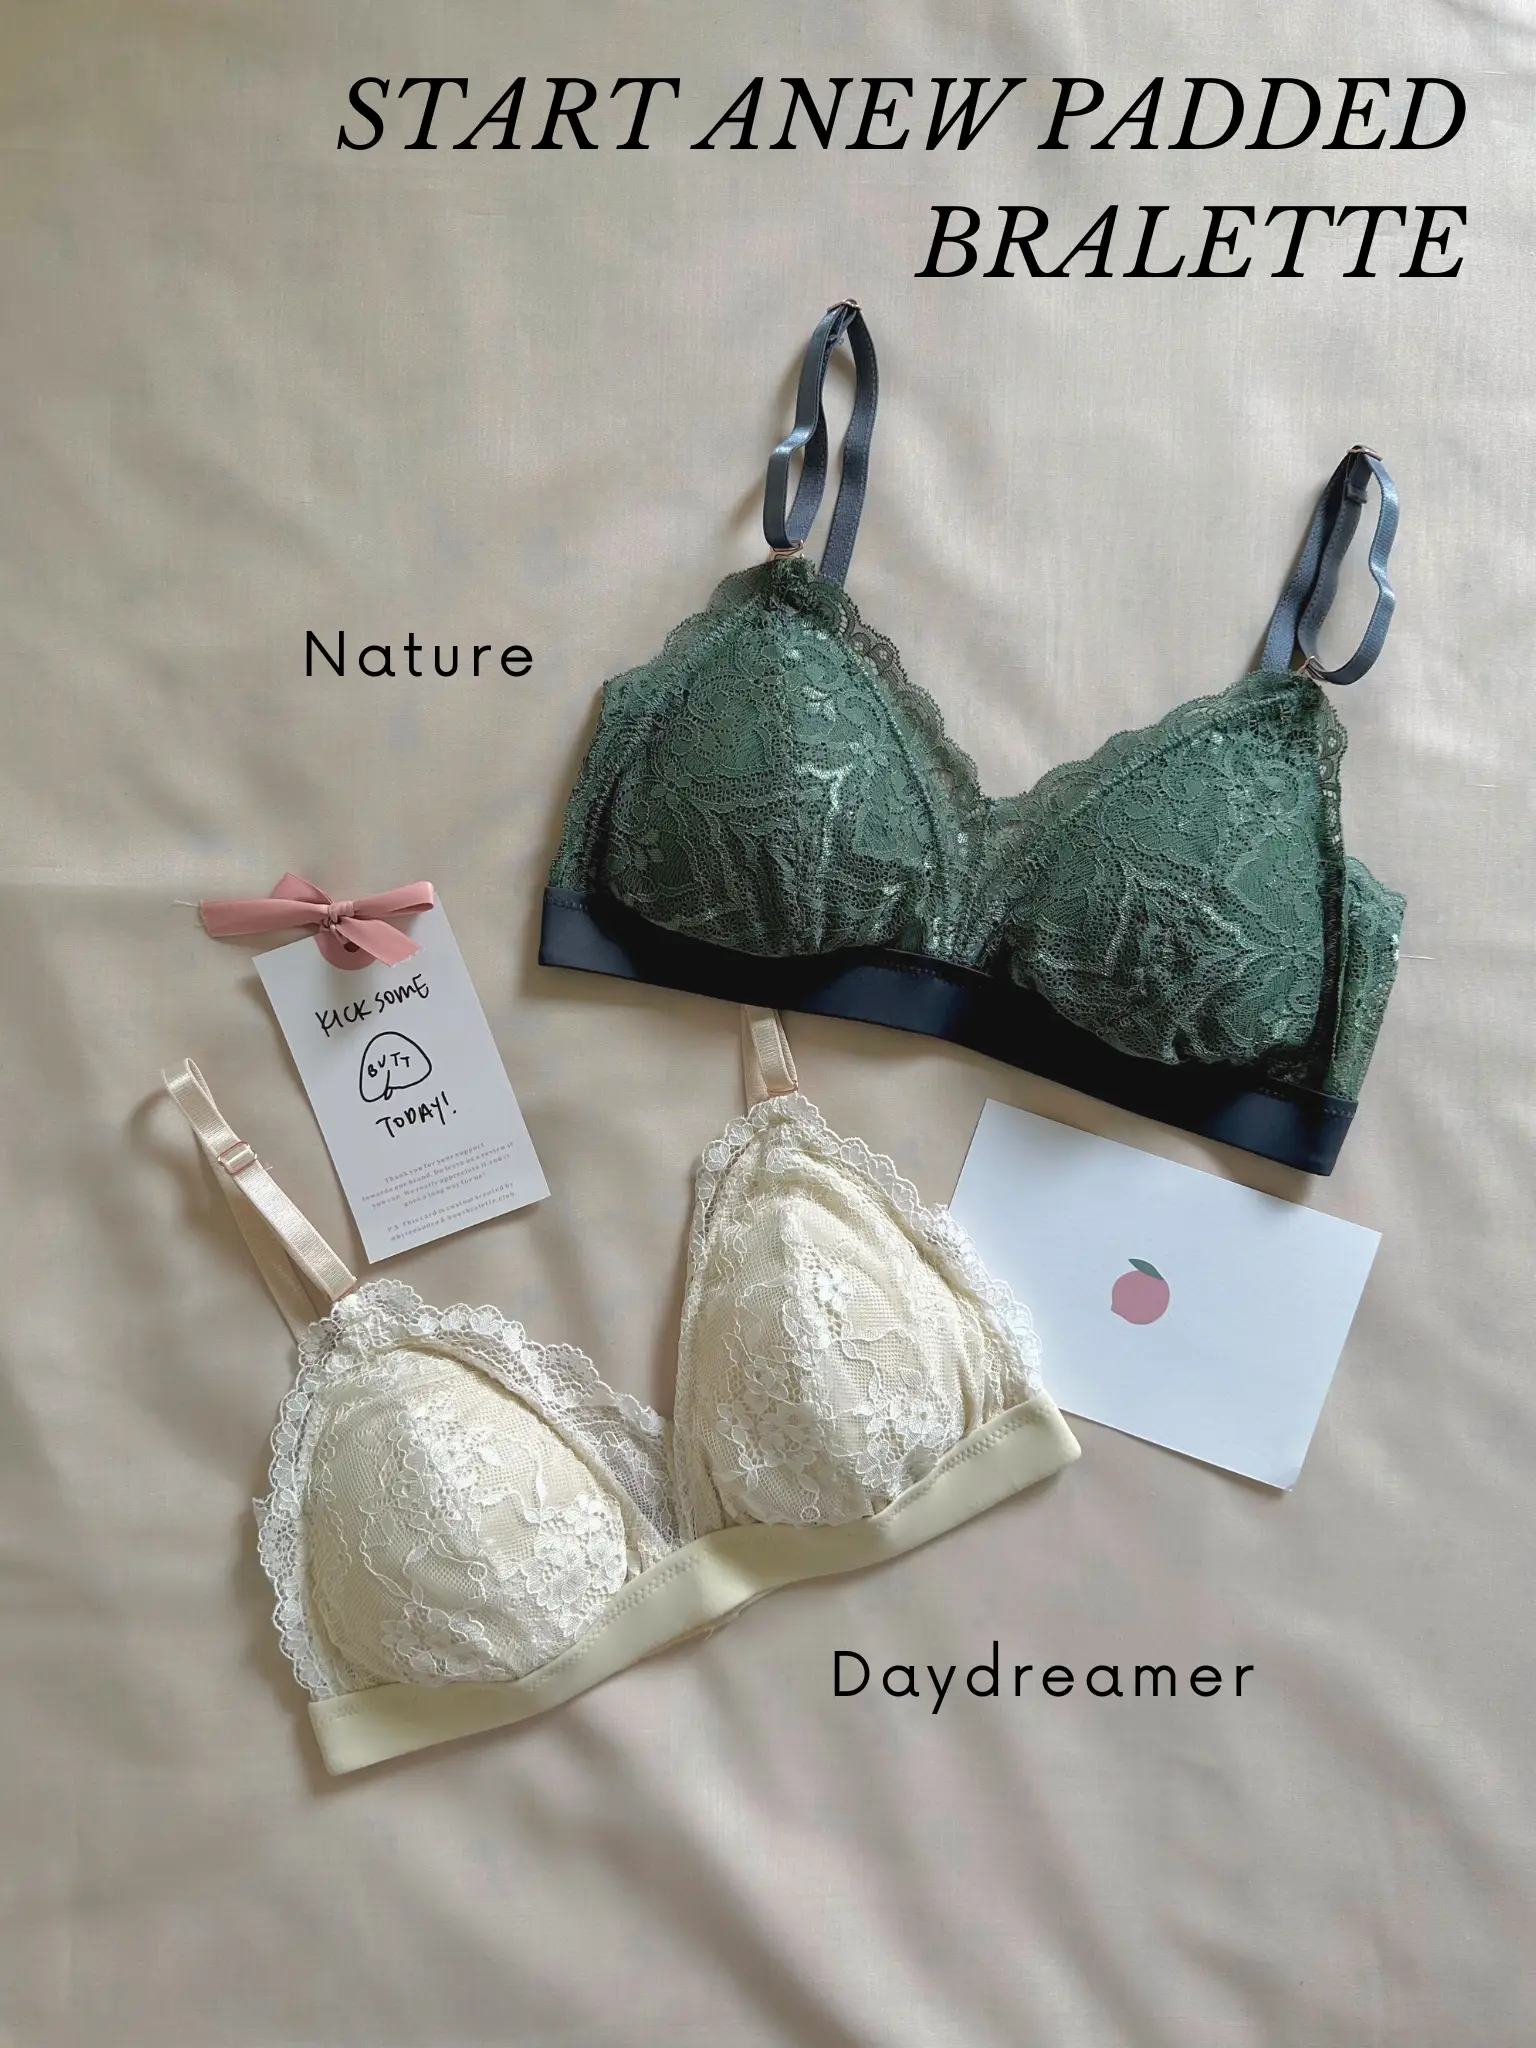 Sexy plus-size bras perfect for busty Singaporean women - Her World  Singapore